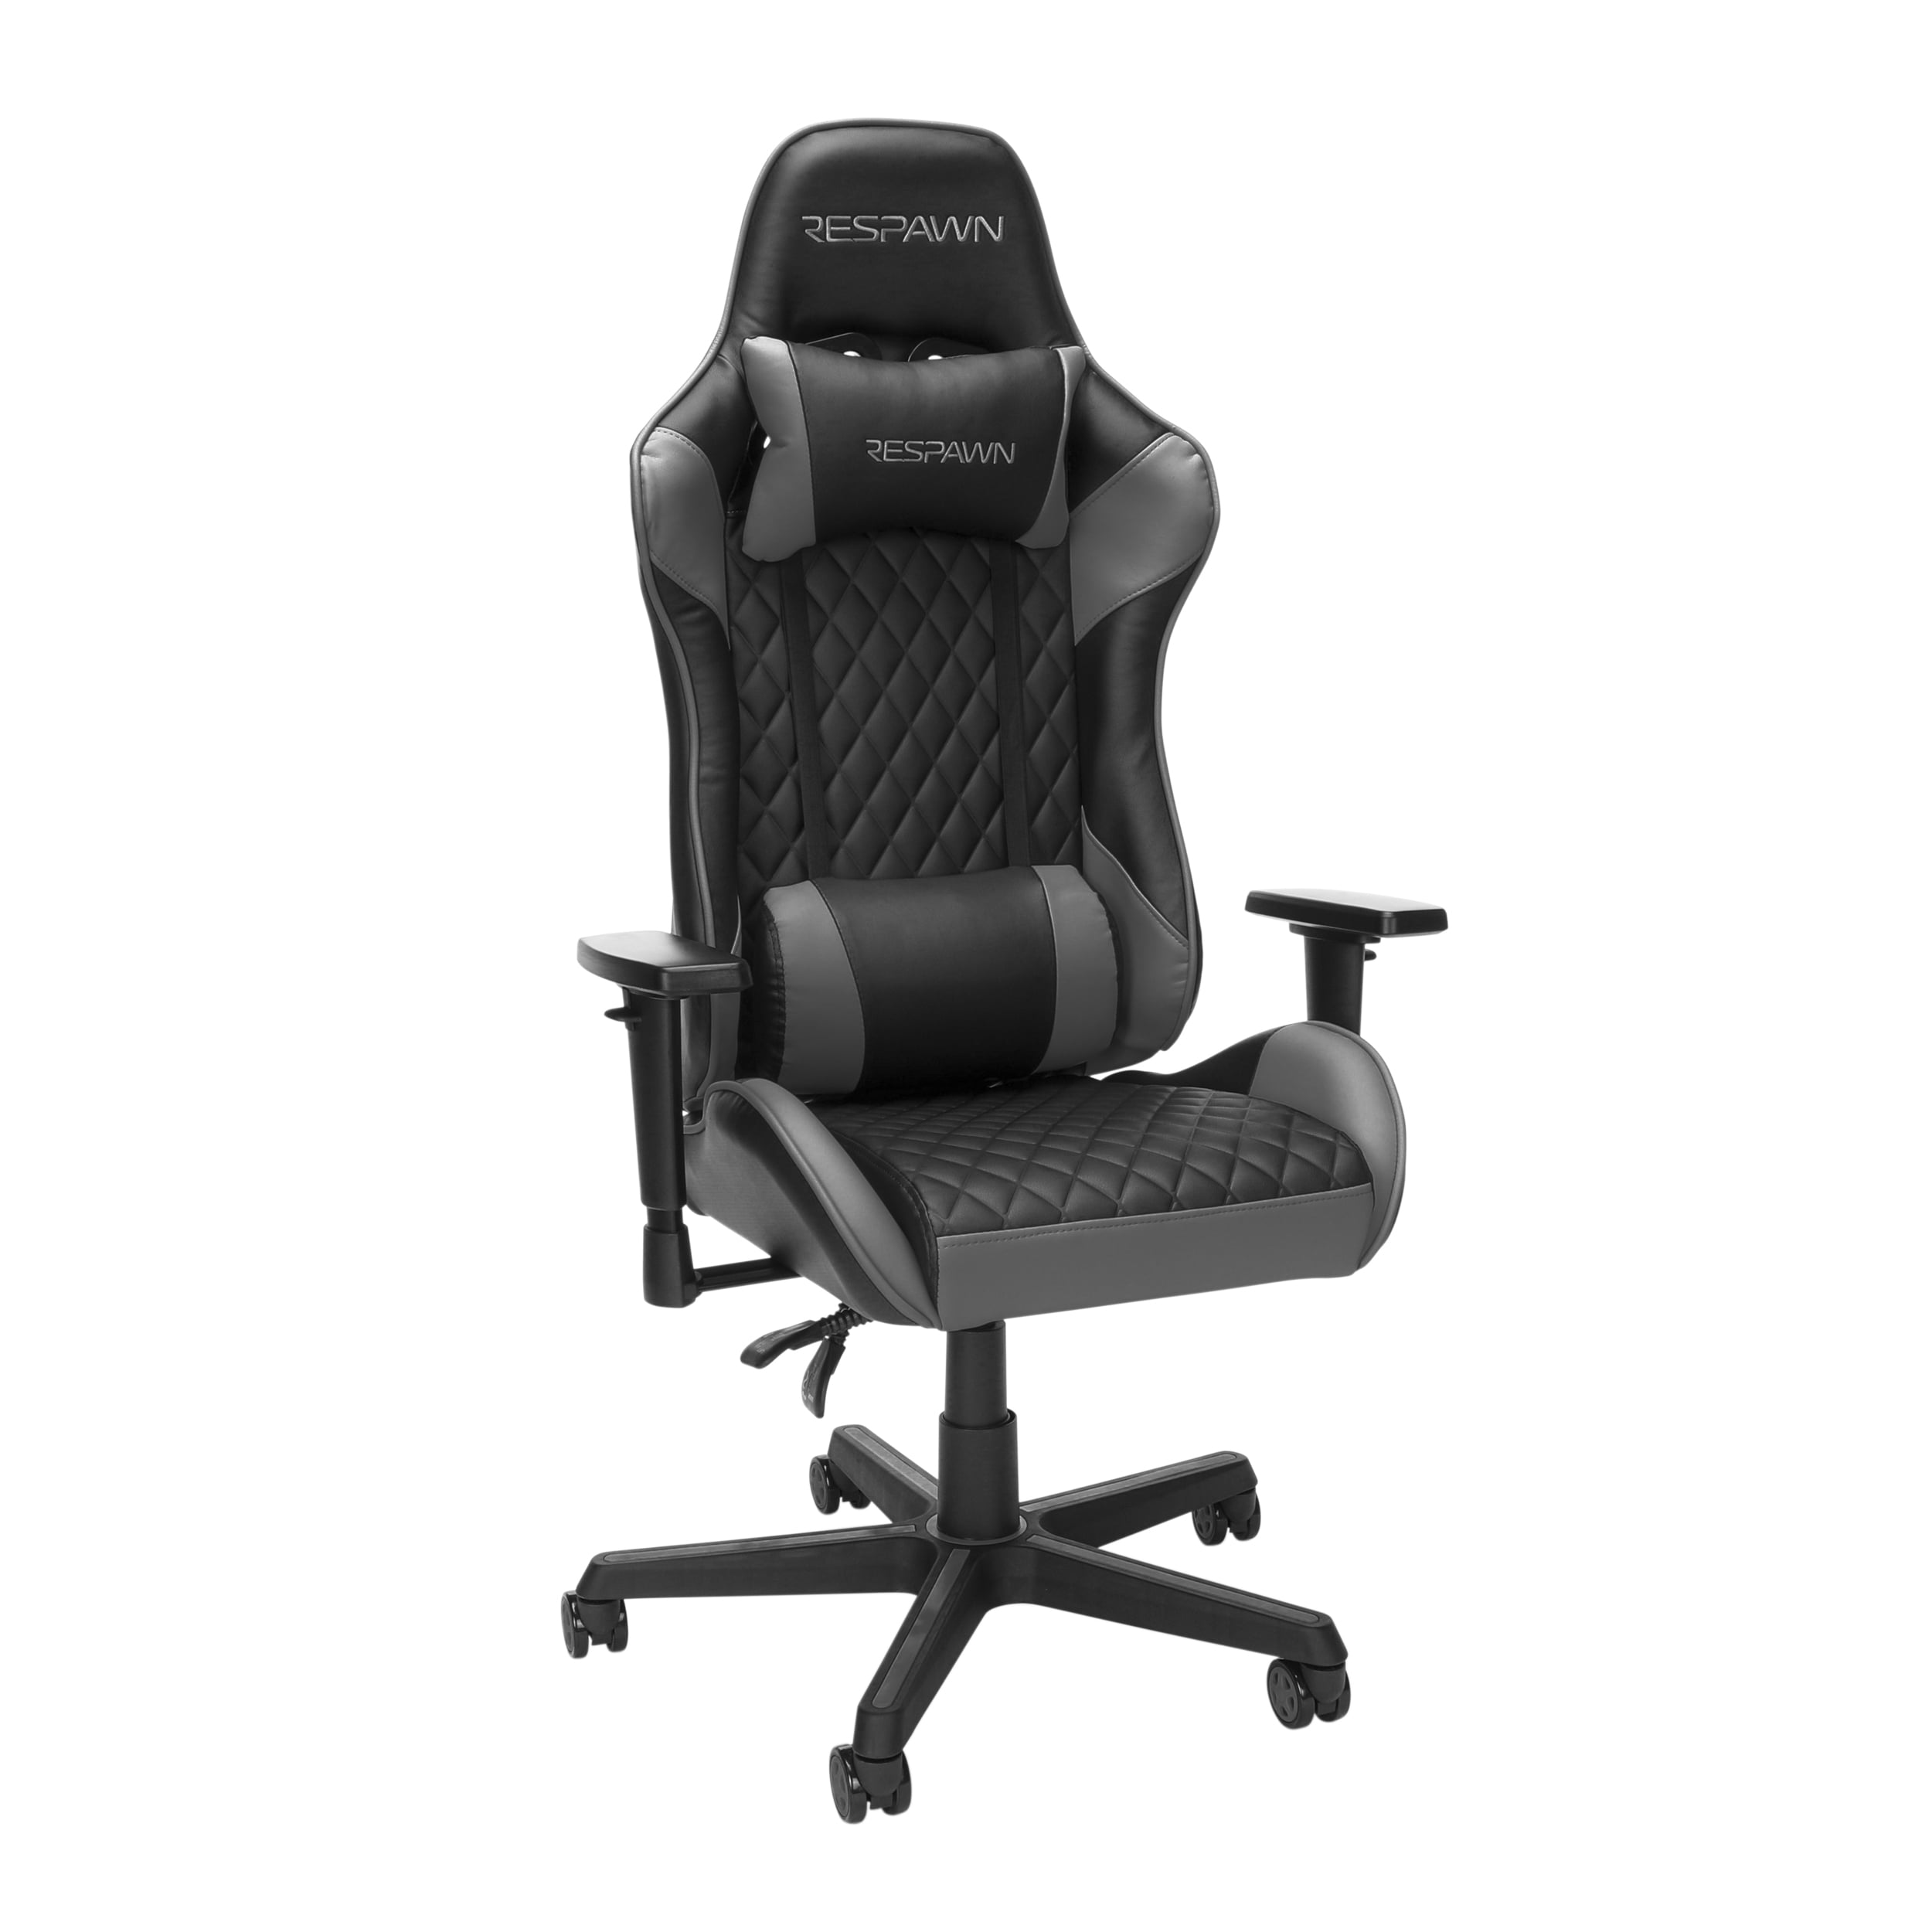 Blue for sale online 110 Racing Style Gaming Chair Respawn 